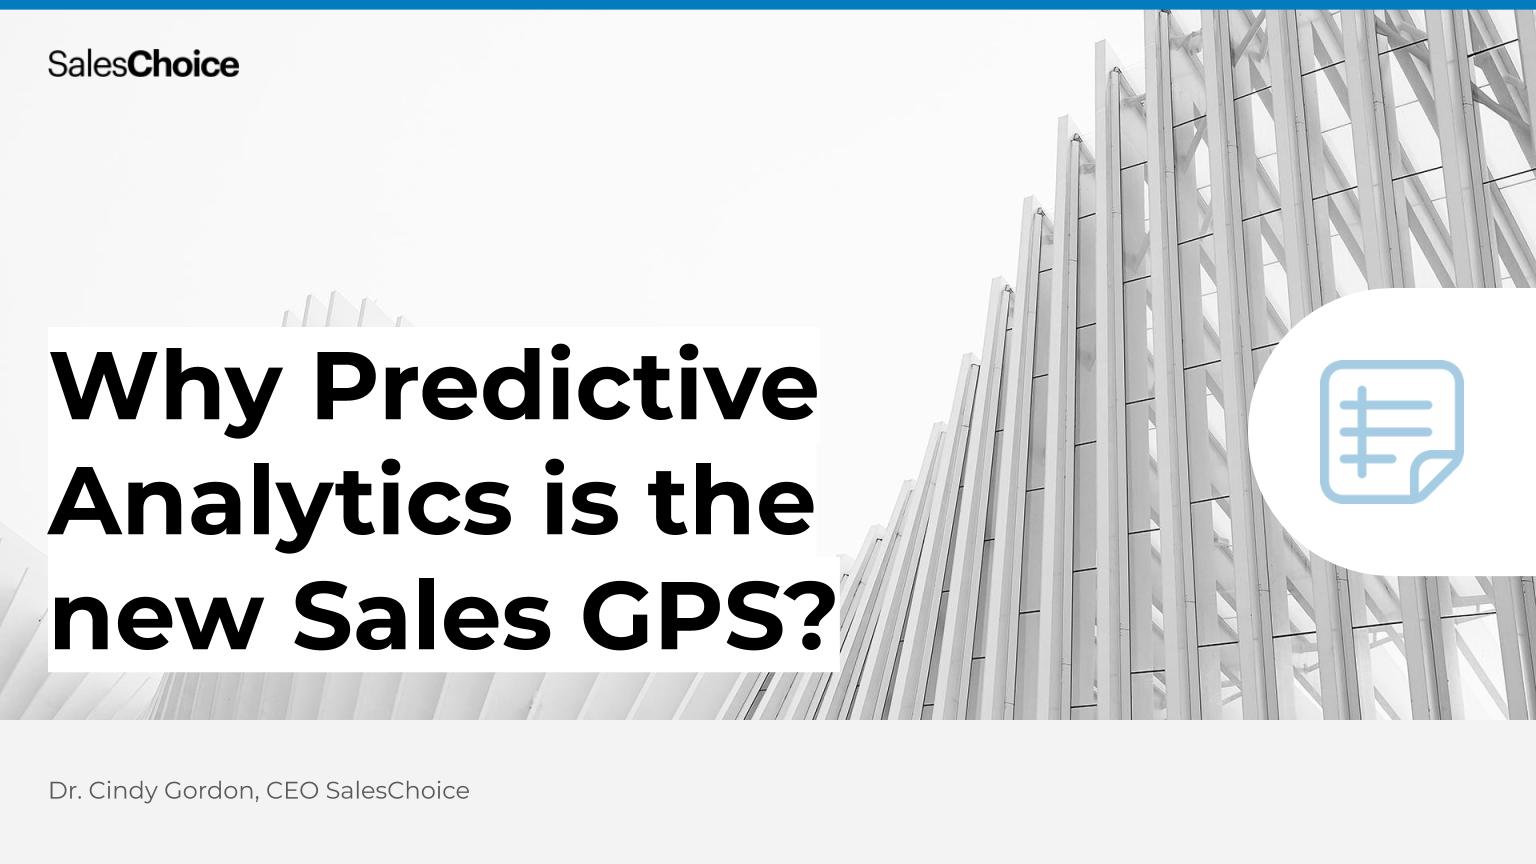 Why Predictive Analytics is the new Sales GPS?